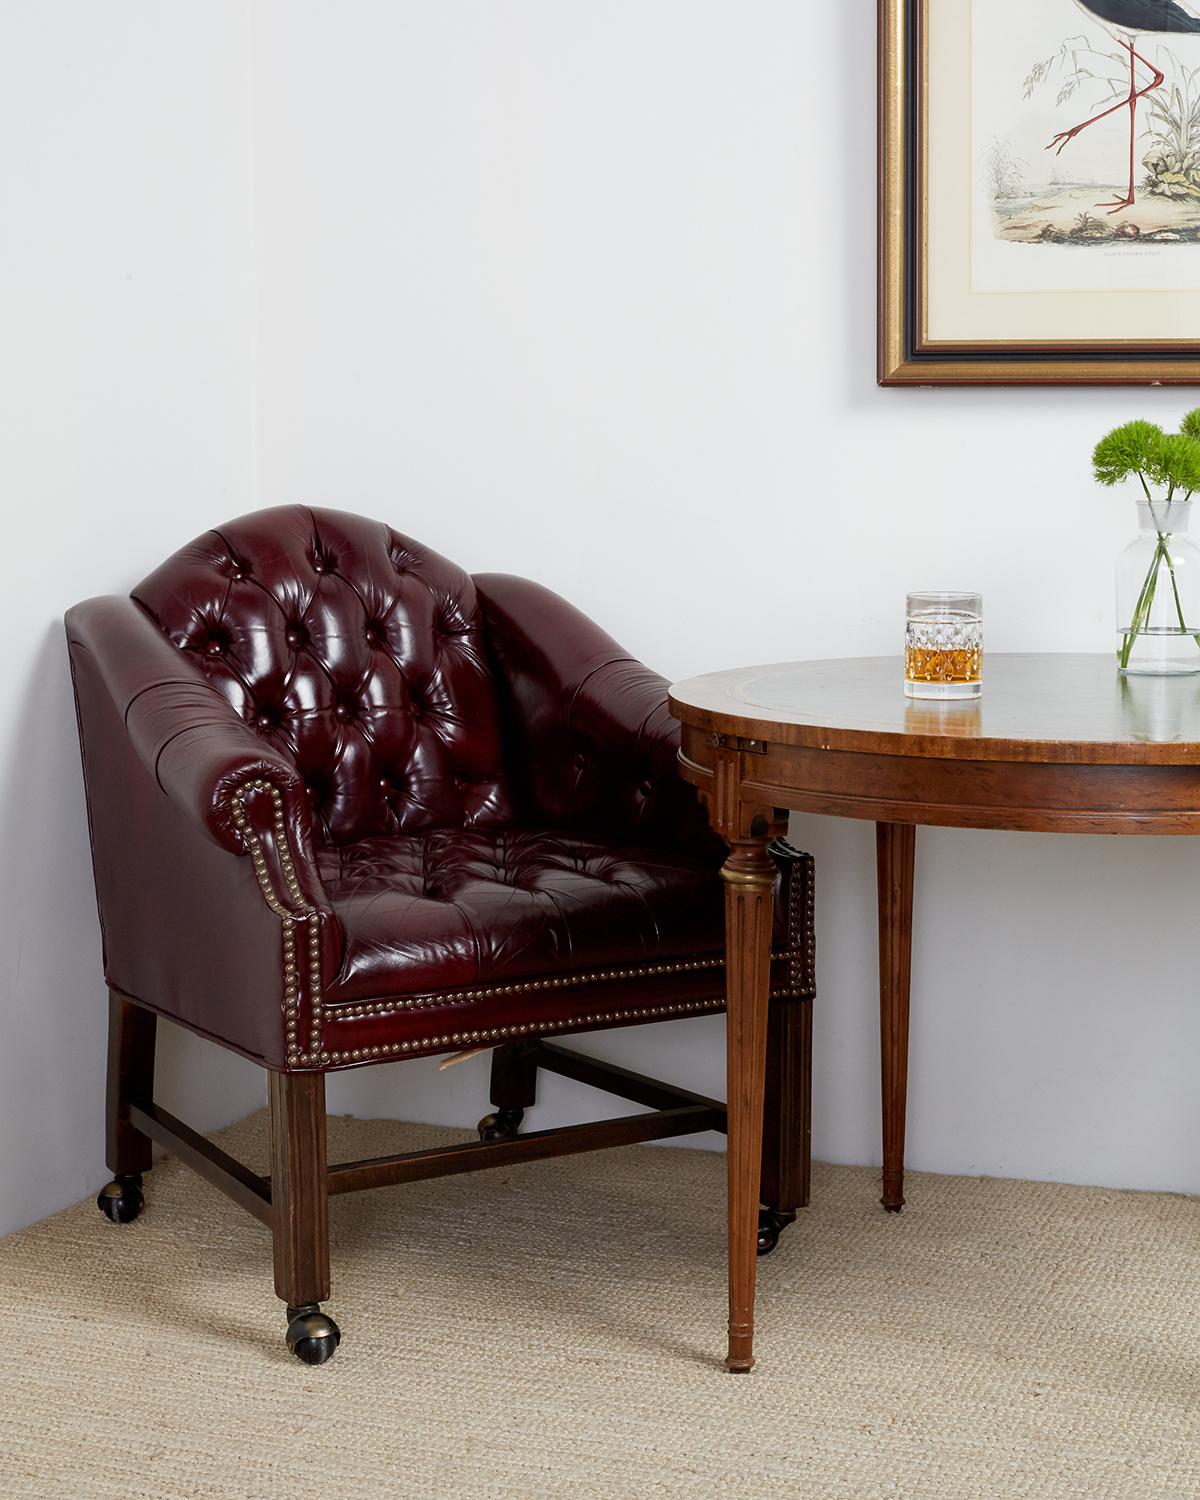 Stately set of four English Chesterfield style tufted leather executive desk or office chairs. Constructed from hardwood frames covered with soft, supple cordovan leather. Accented by brass nailhead trim with reeded front legs. Lovely style with a